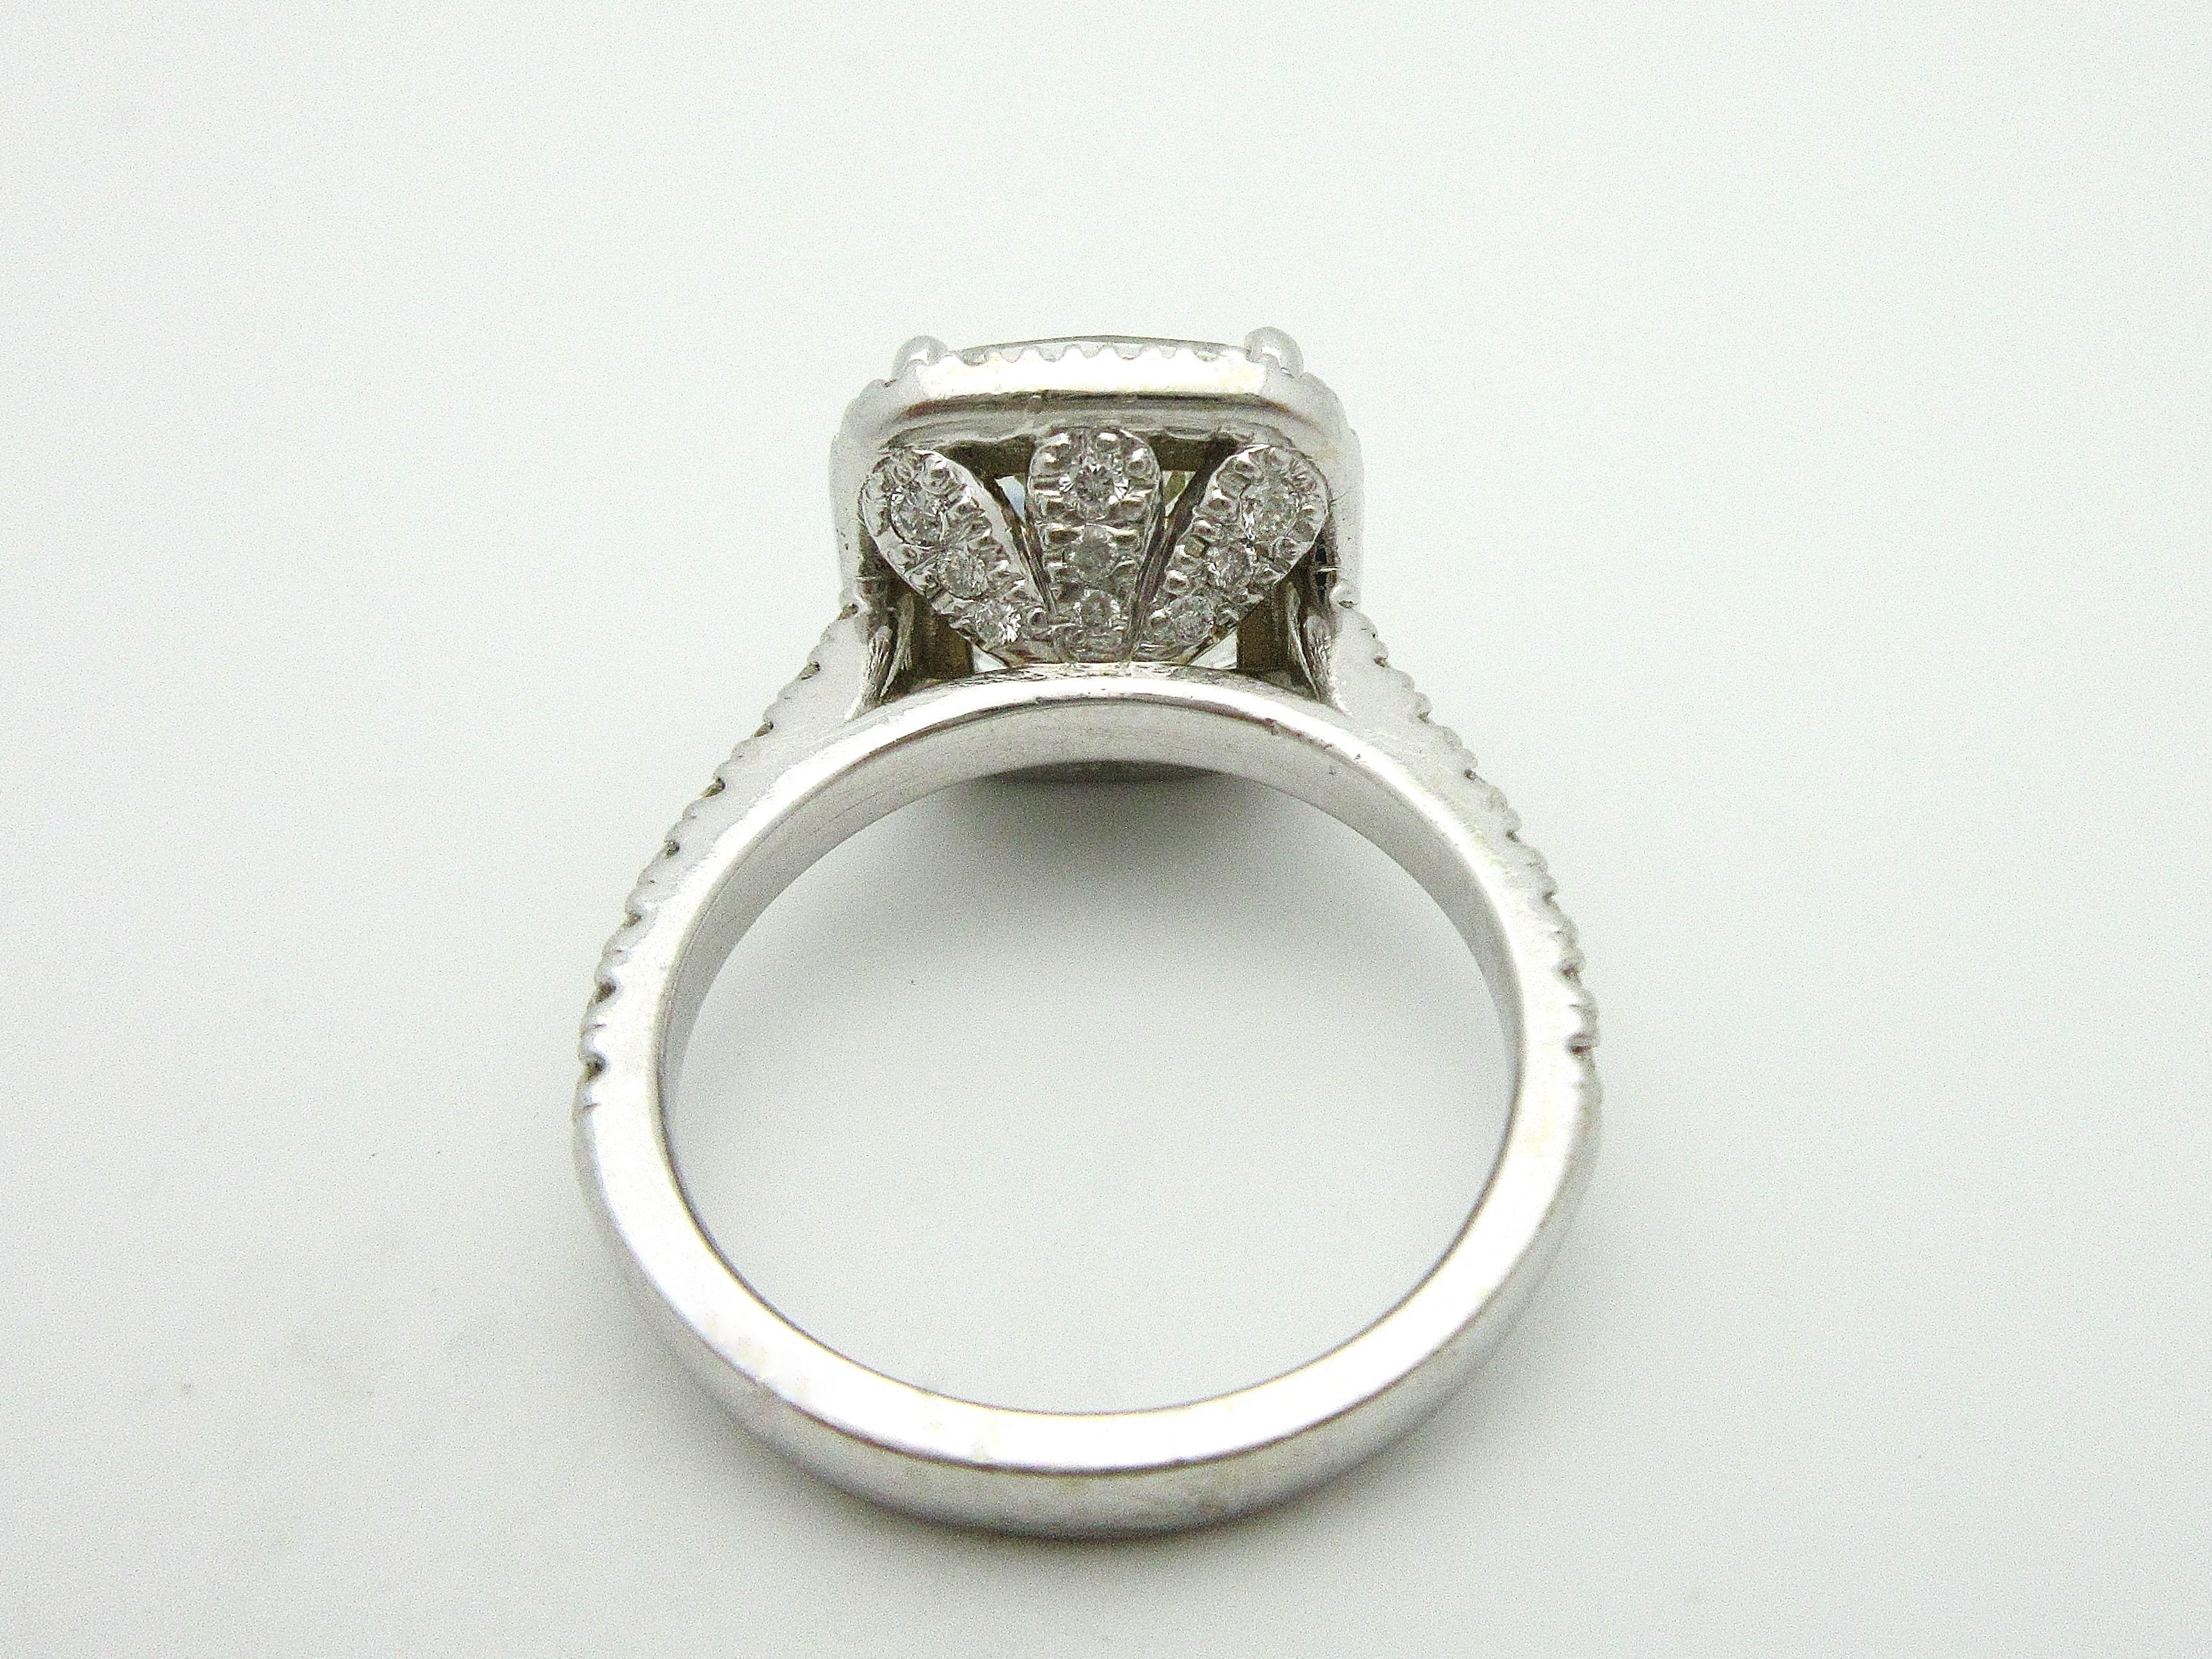 pictures of 4 carat diamond rings